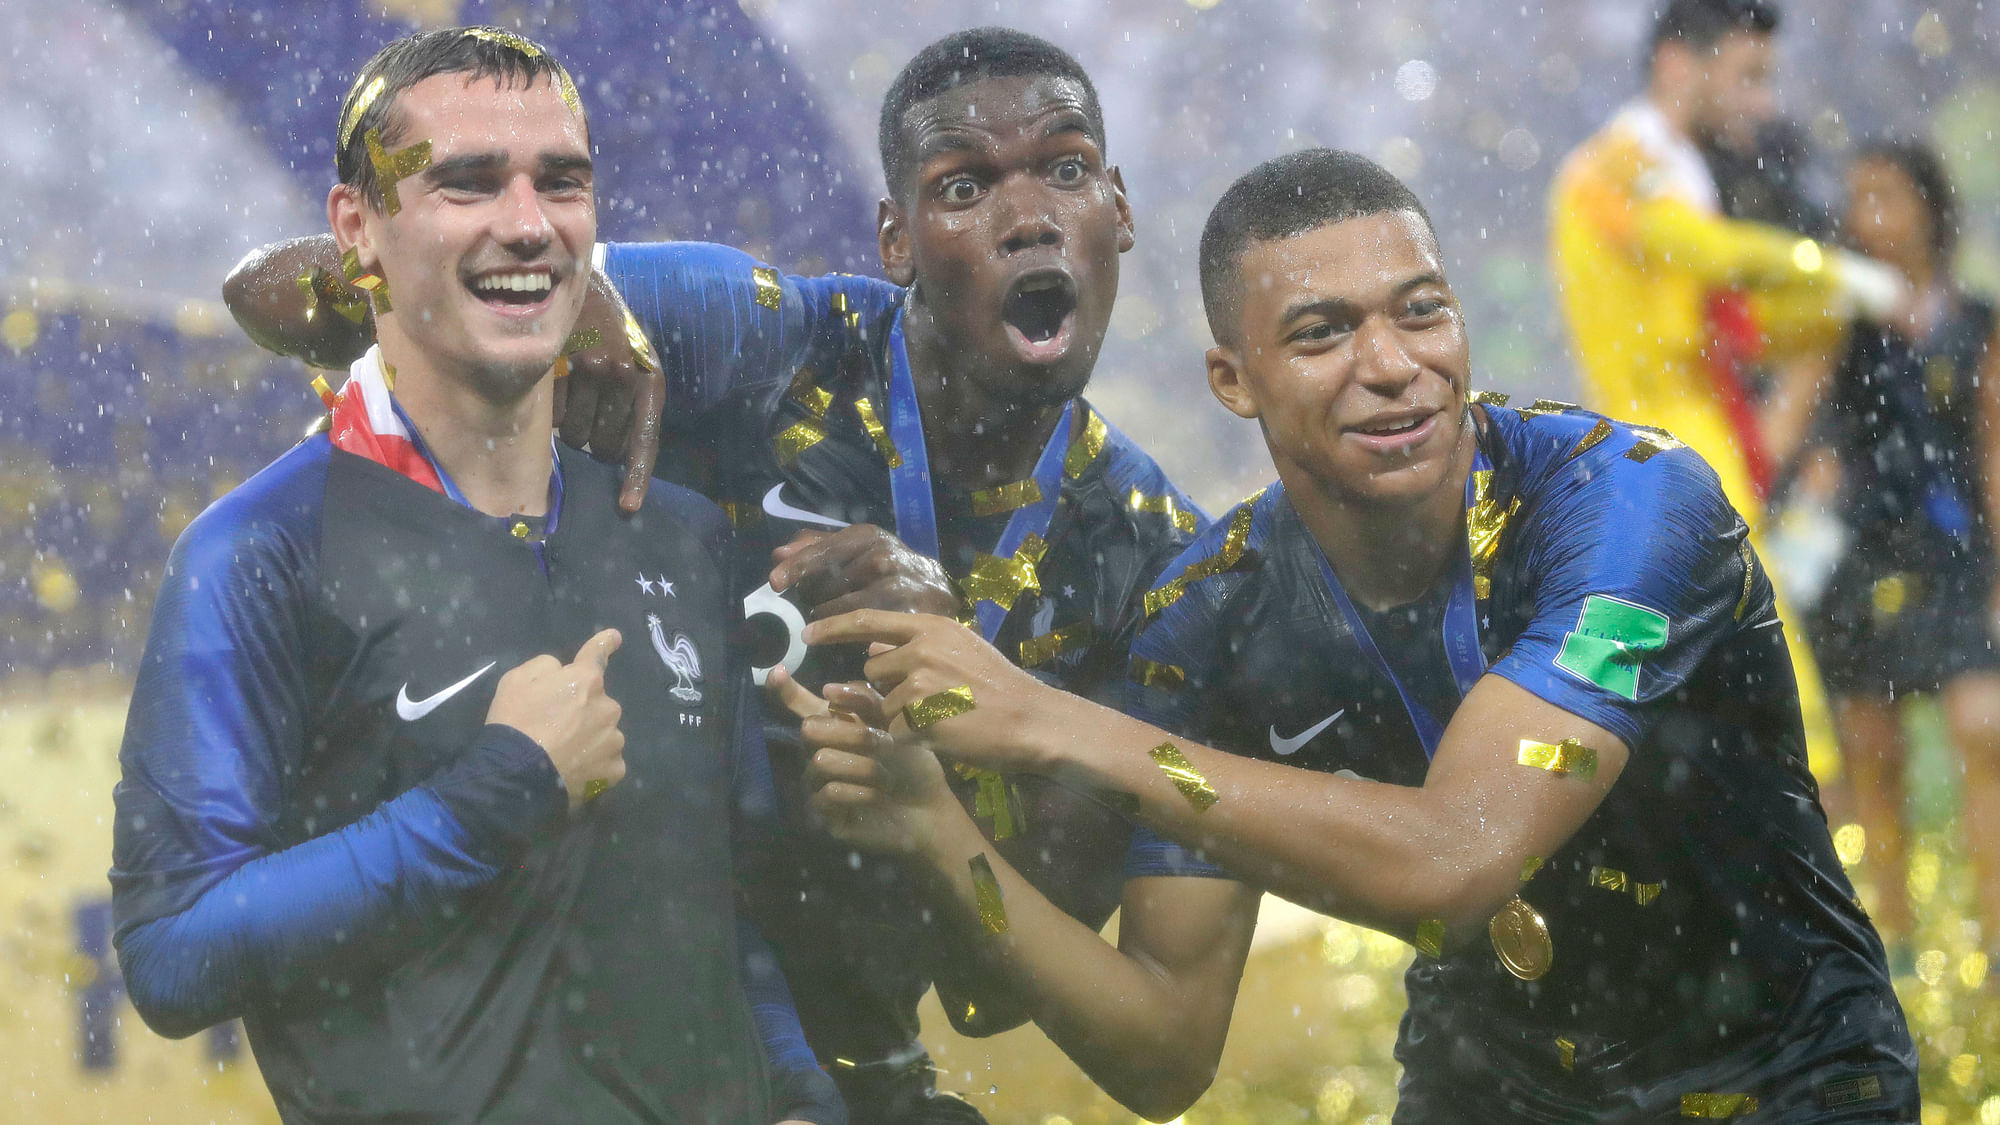 Antoine Griezmann (L) celebrates France’s World Cup win with Paul Pogba (C) and Kylian Mbappe (R).